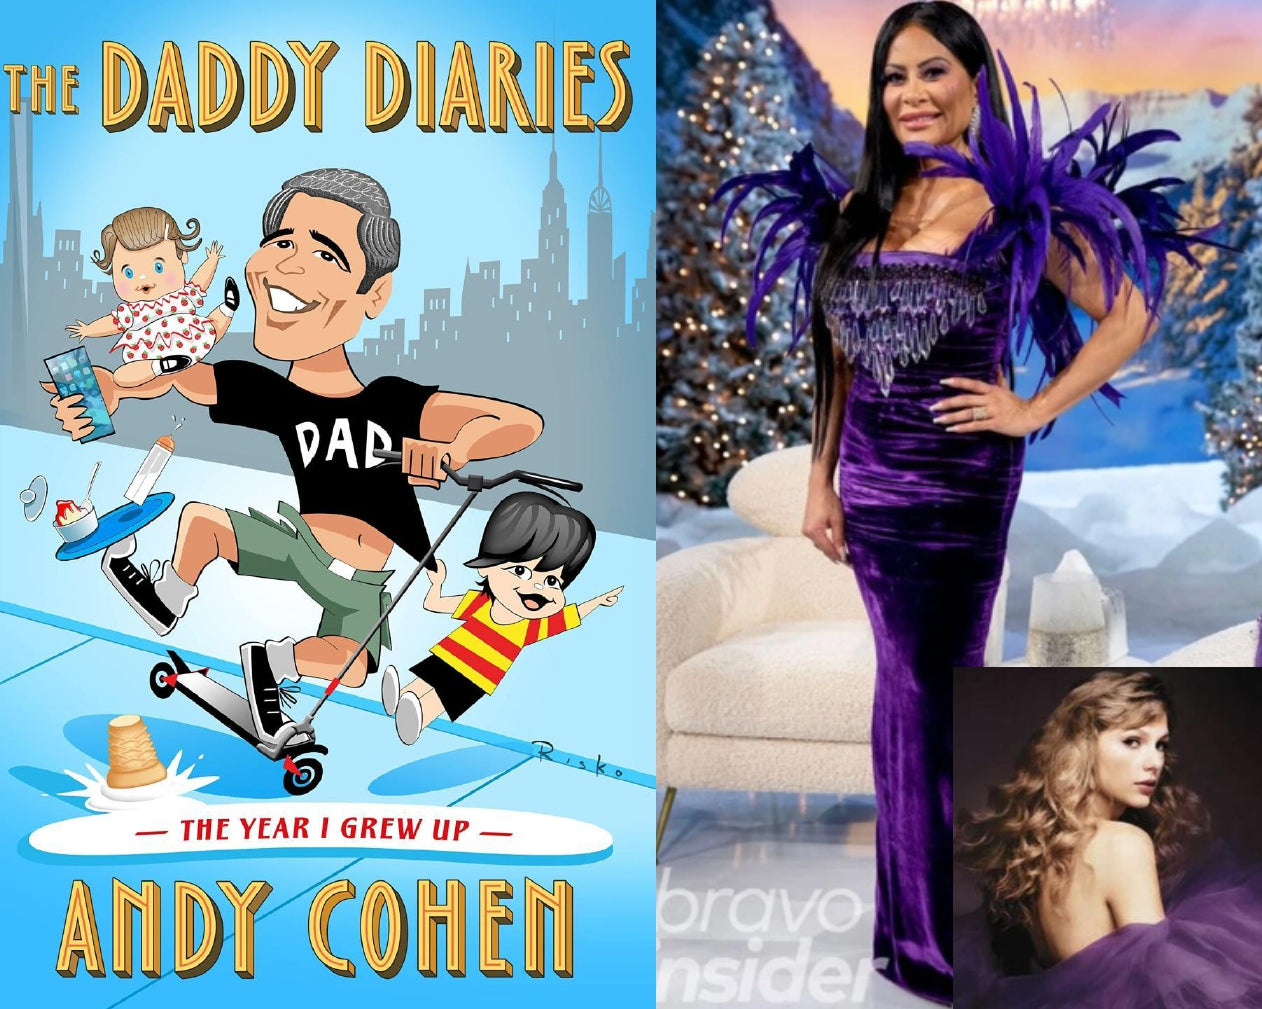 Andy Cohen Alludes to a Scandal Bigger than Vanderpump Rules in his Daddy Diaries